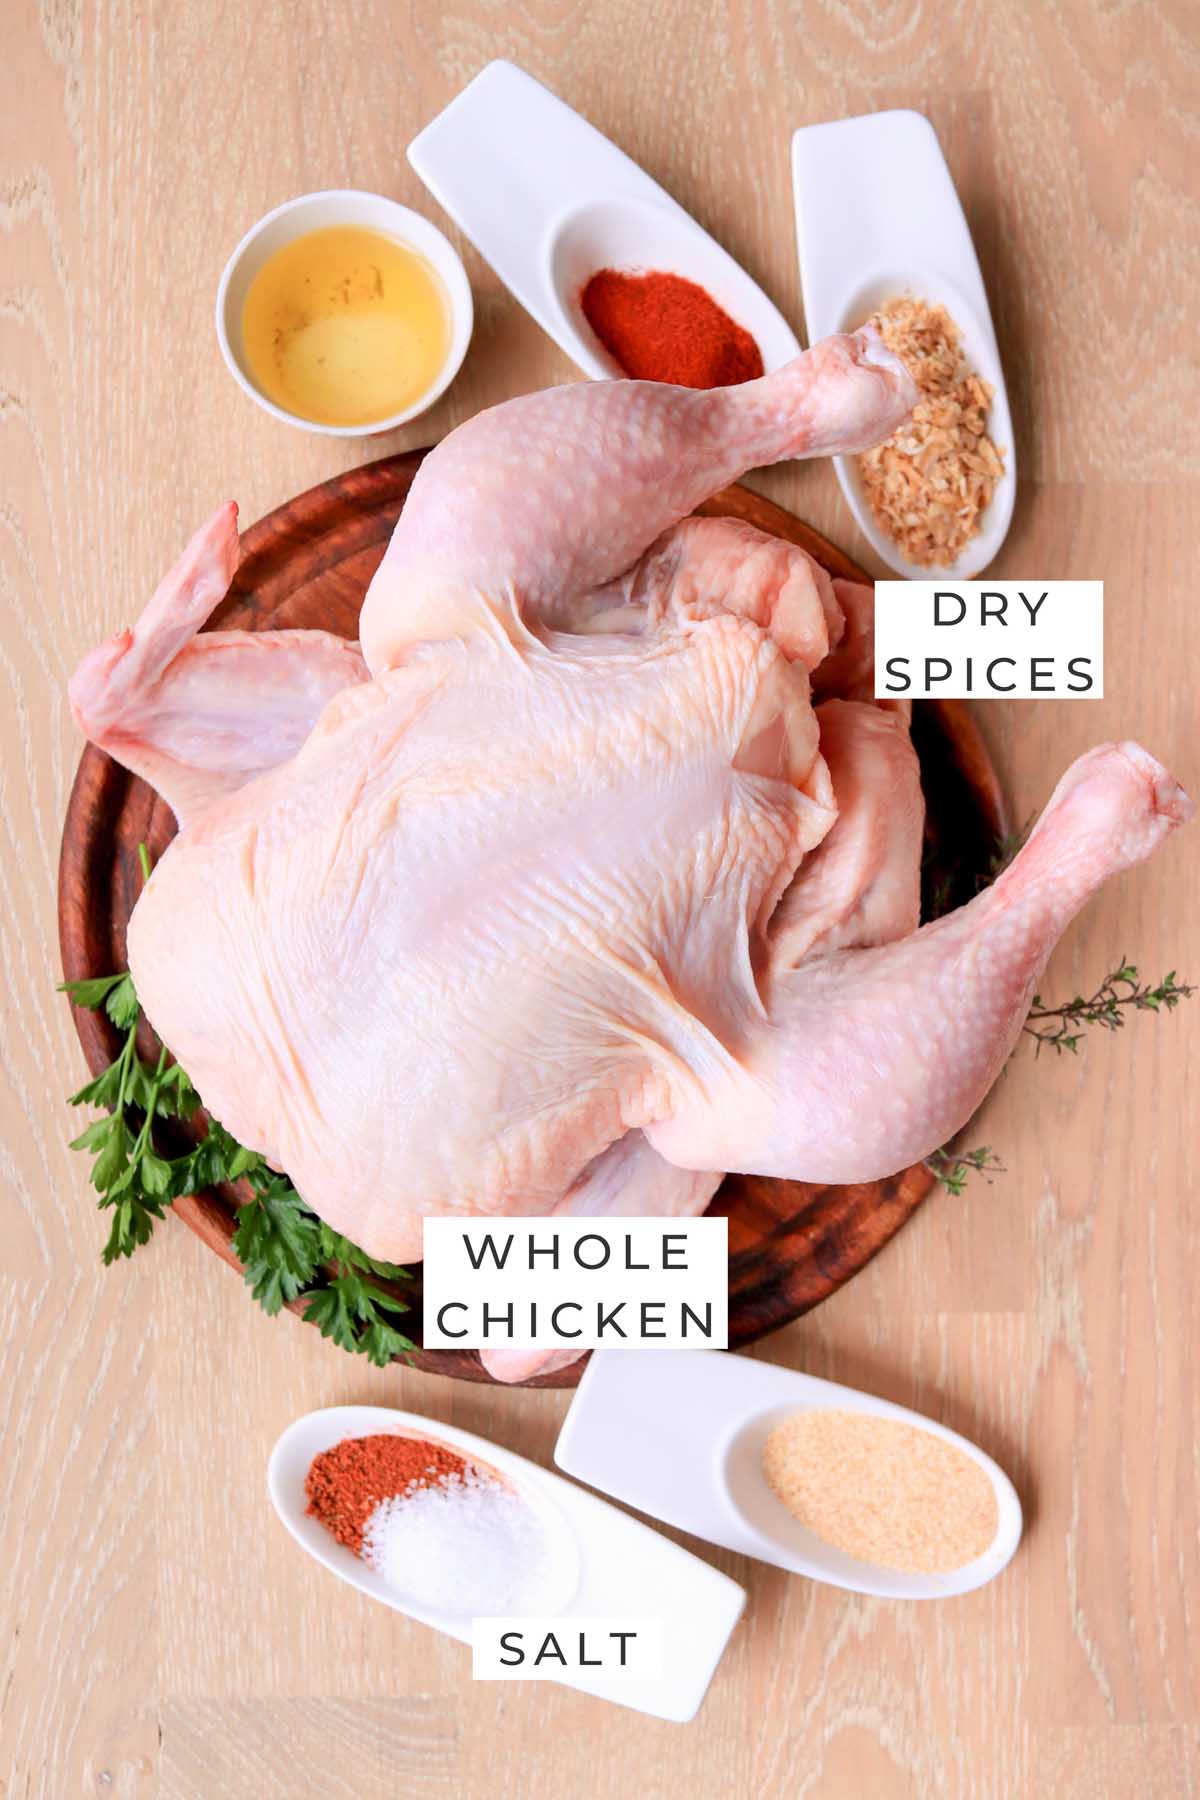 Labeled ingredients for the whole chicken.